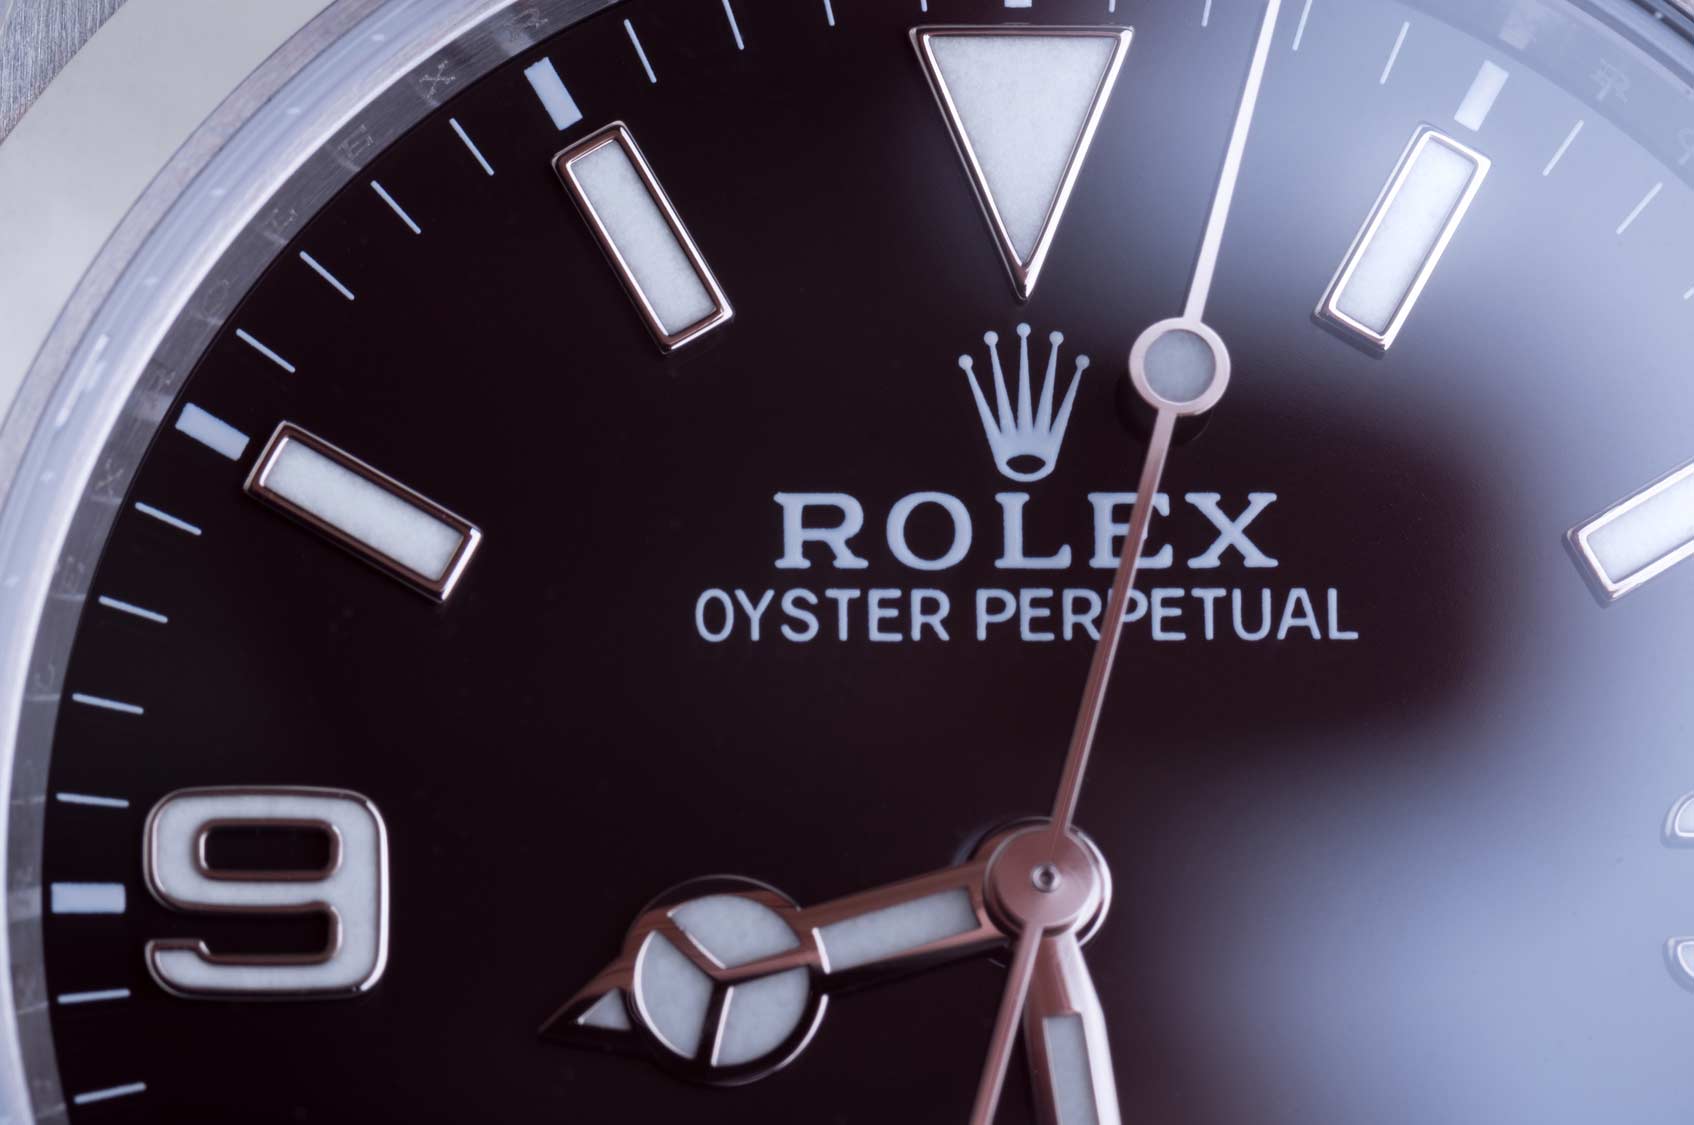 De&Di.Agency - The Rolex logo story. Know the story and... | Facebook